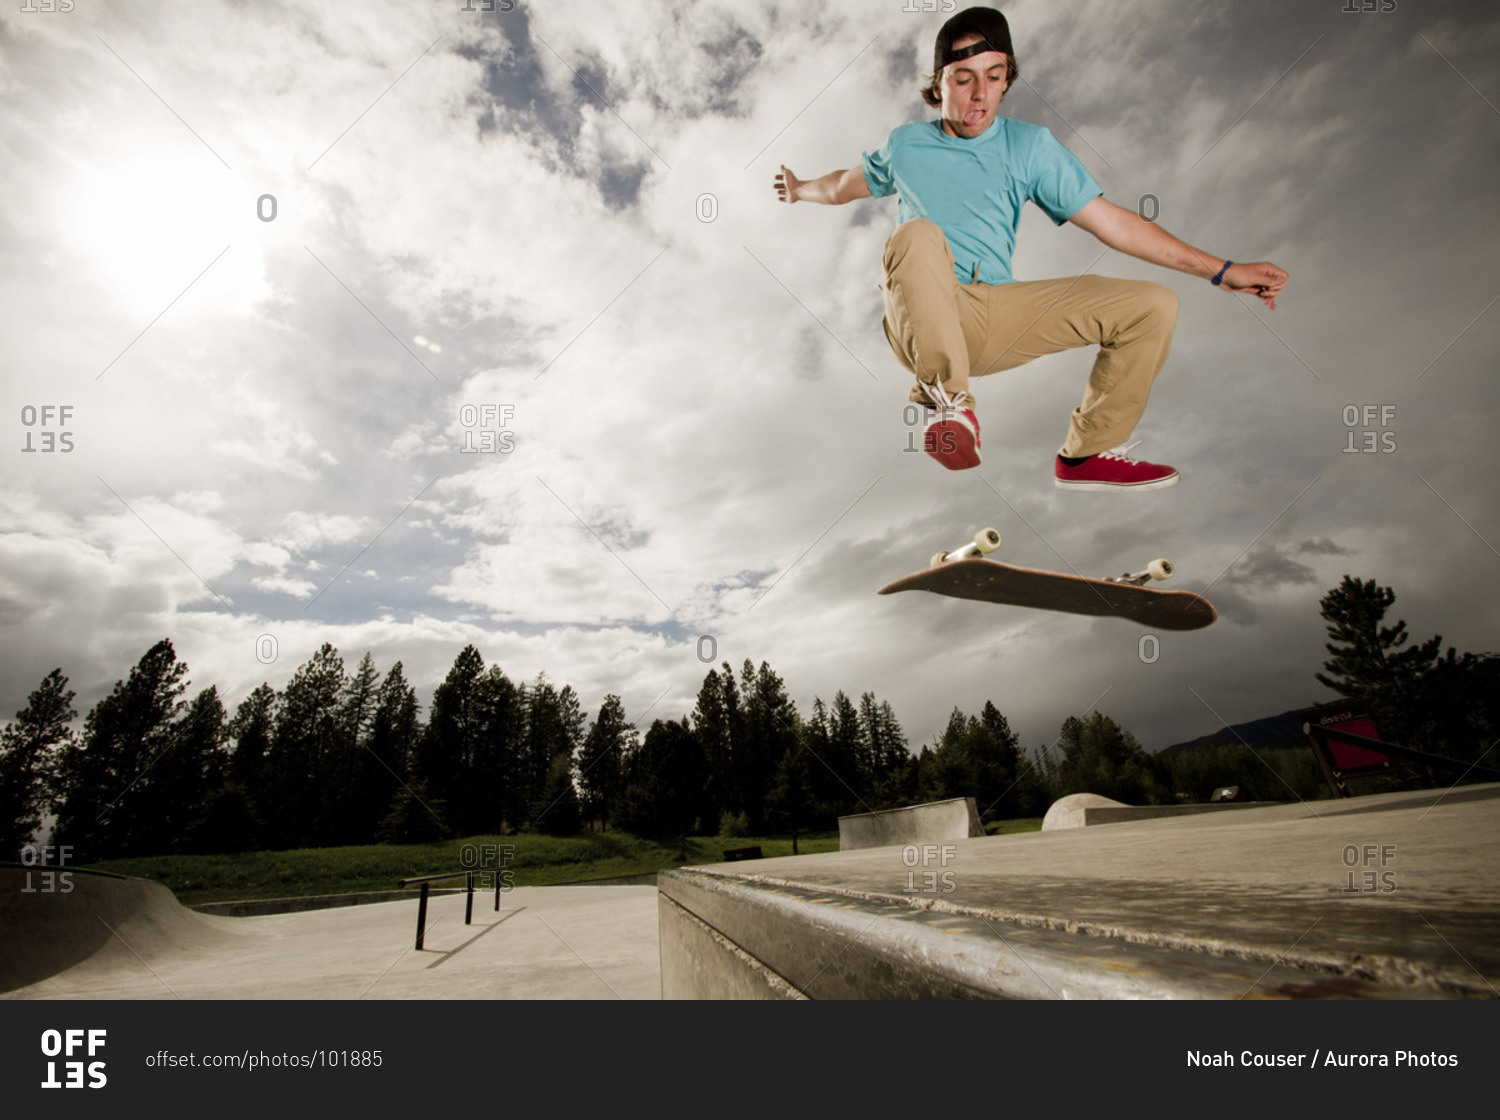 A skater kickflips his skateboard on a cloudy day at the skatepark in Whitefish, Montana.